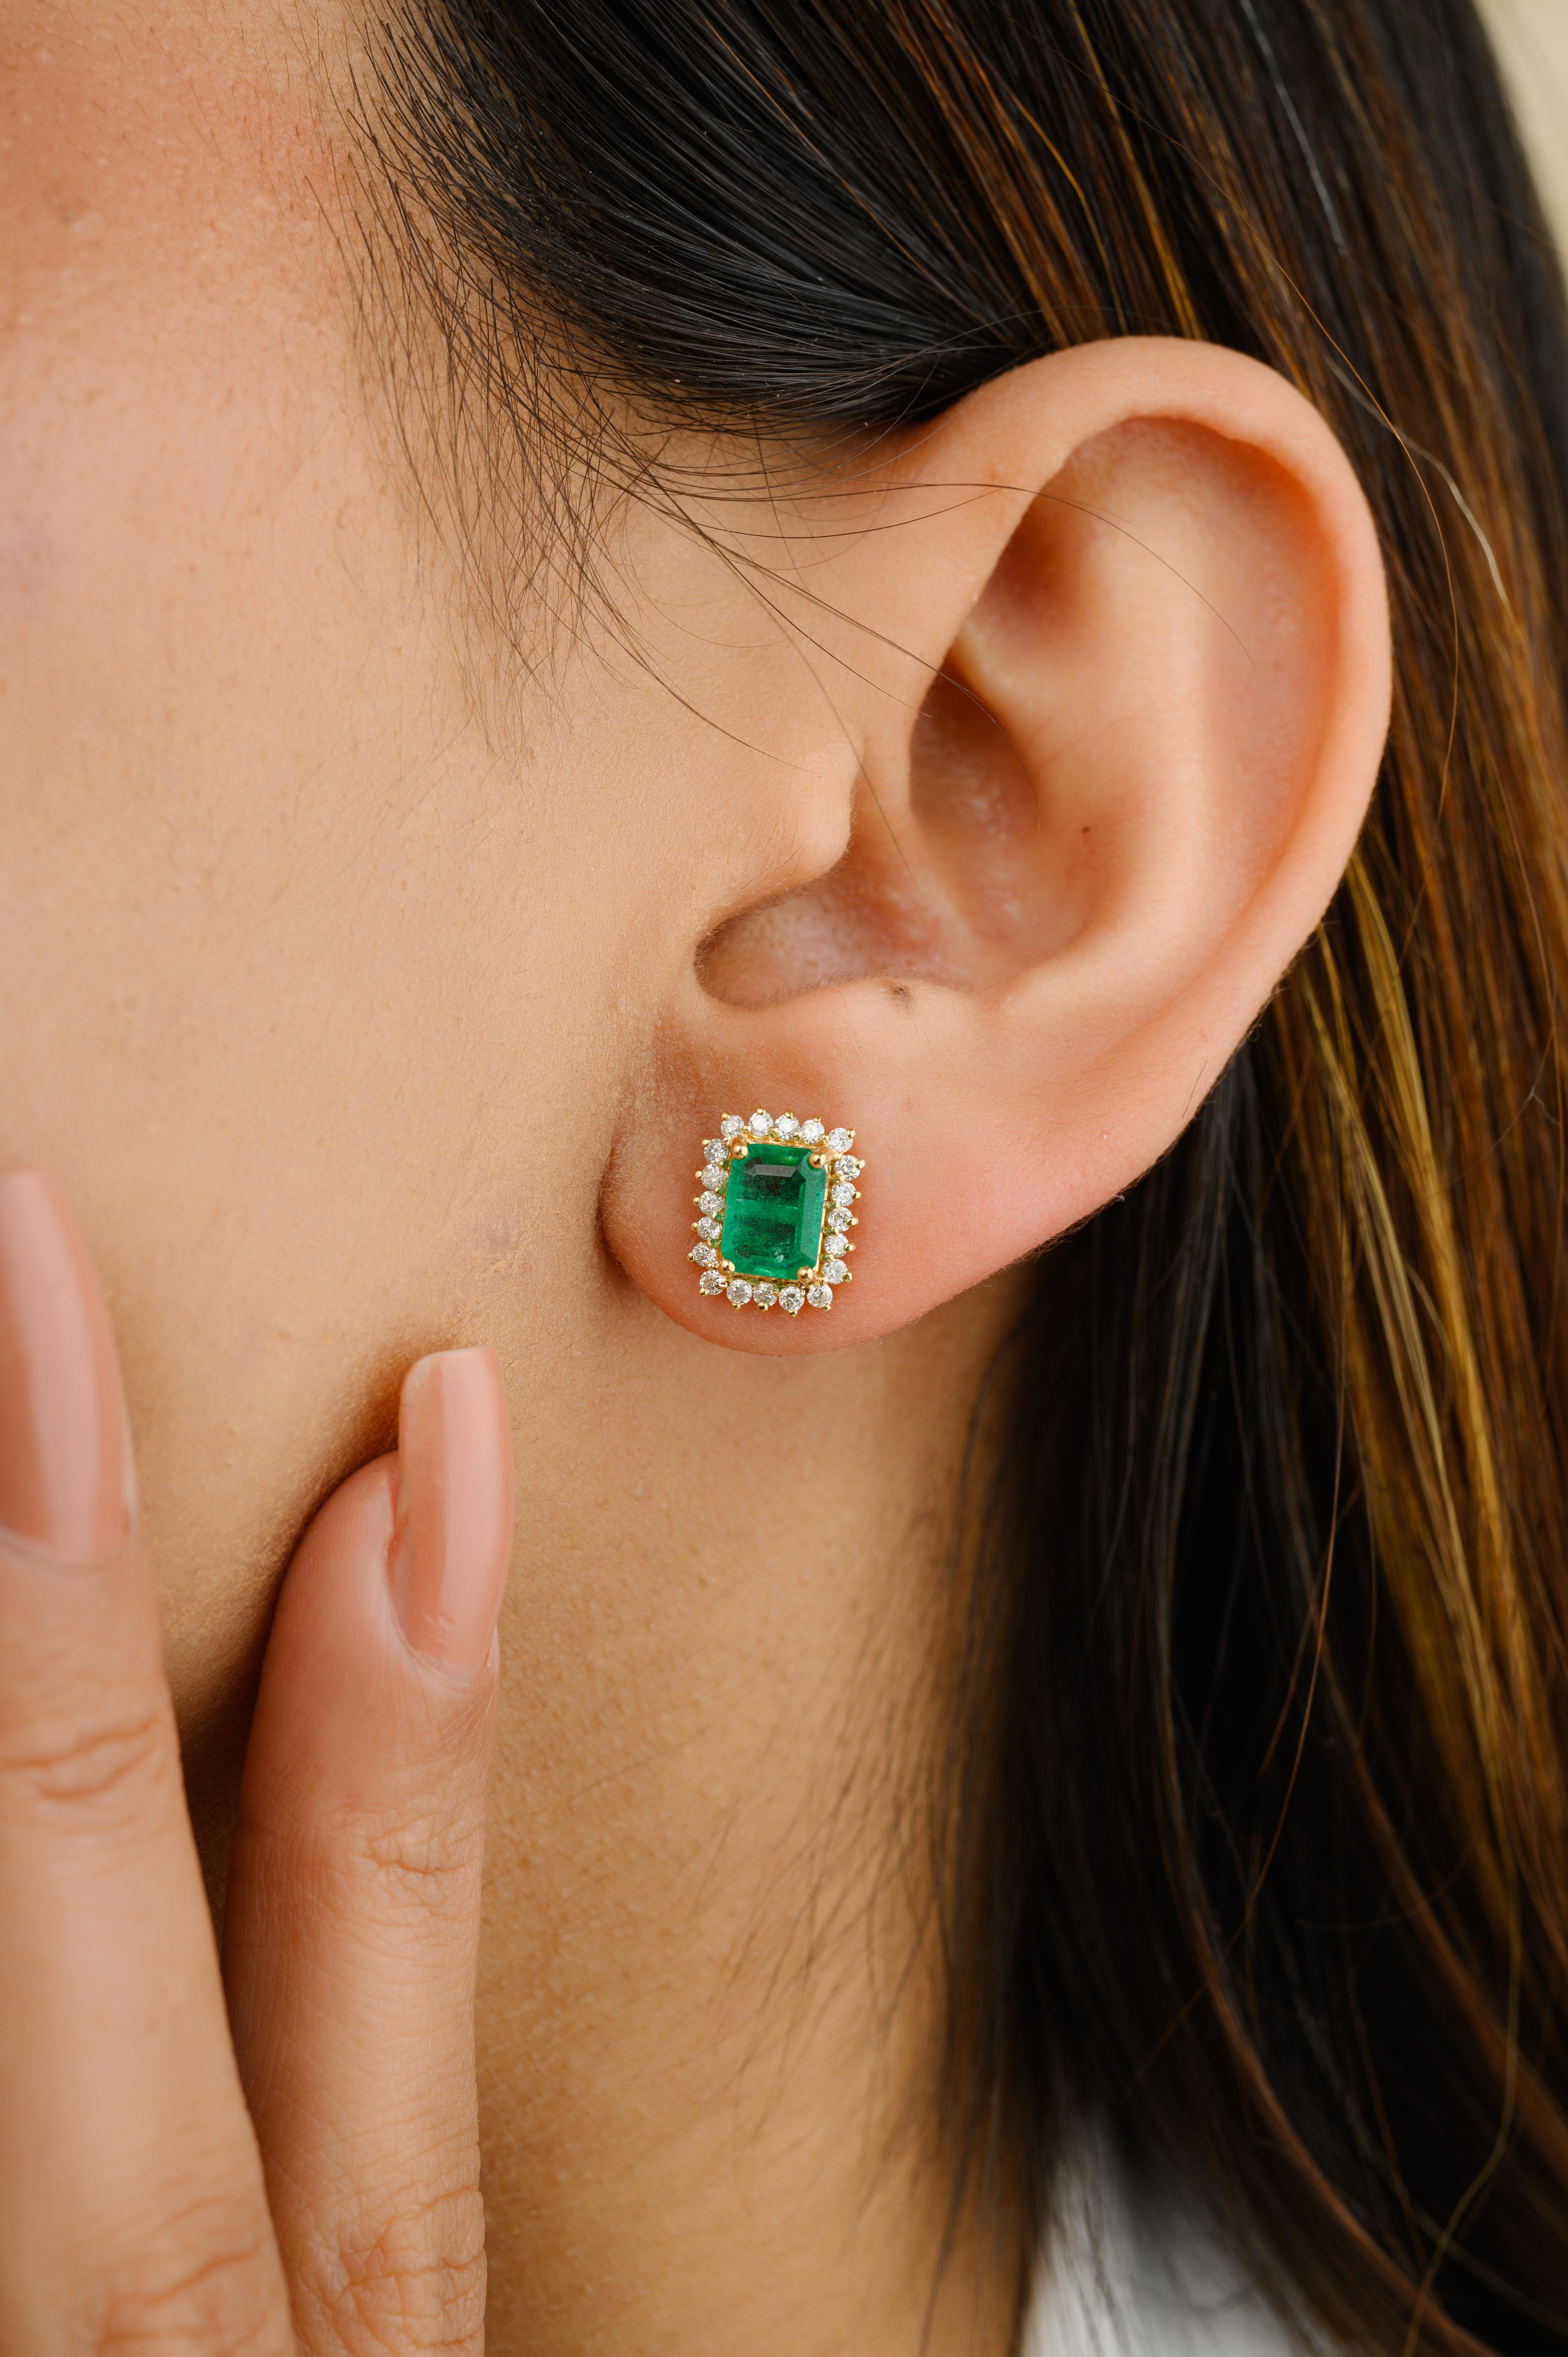 Certified May Birthstone Emerald Halo Diamond Stud Earrings in 18K Gold to make a statement with your look. You shall need studs earrings to make a statement with your look. These earrings create a sparkling, luxurious look featuring octagon cut